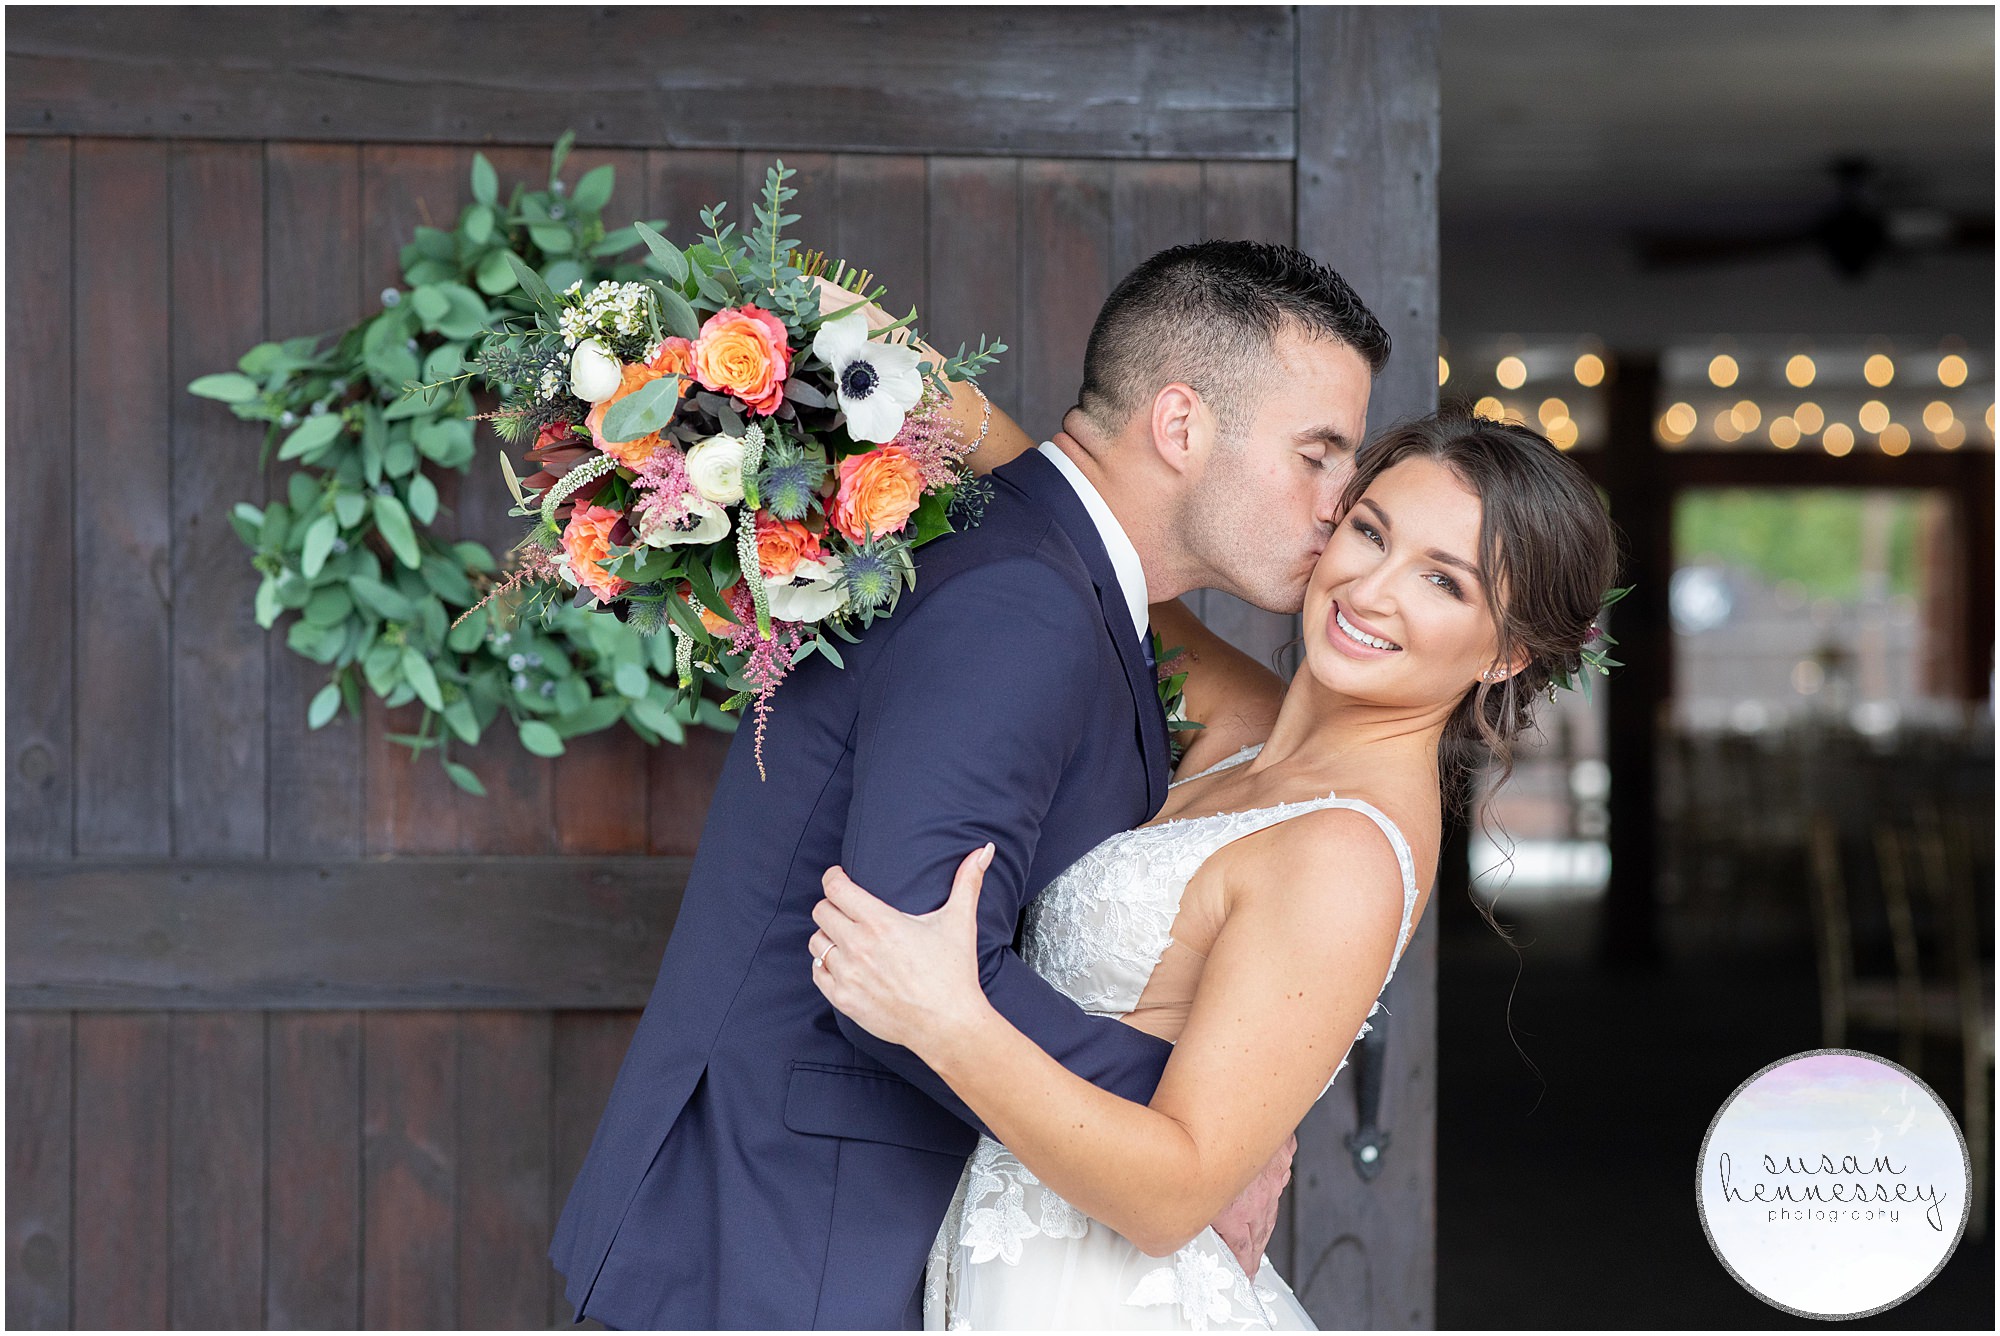 Rustic barn door is great for portraits at The Hamilton Manor